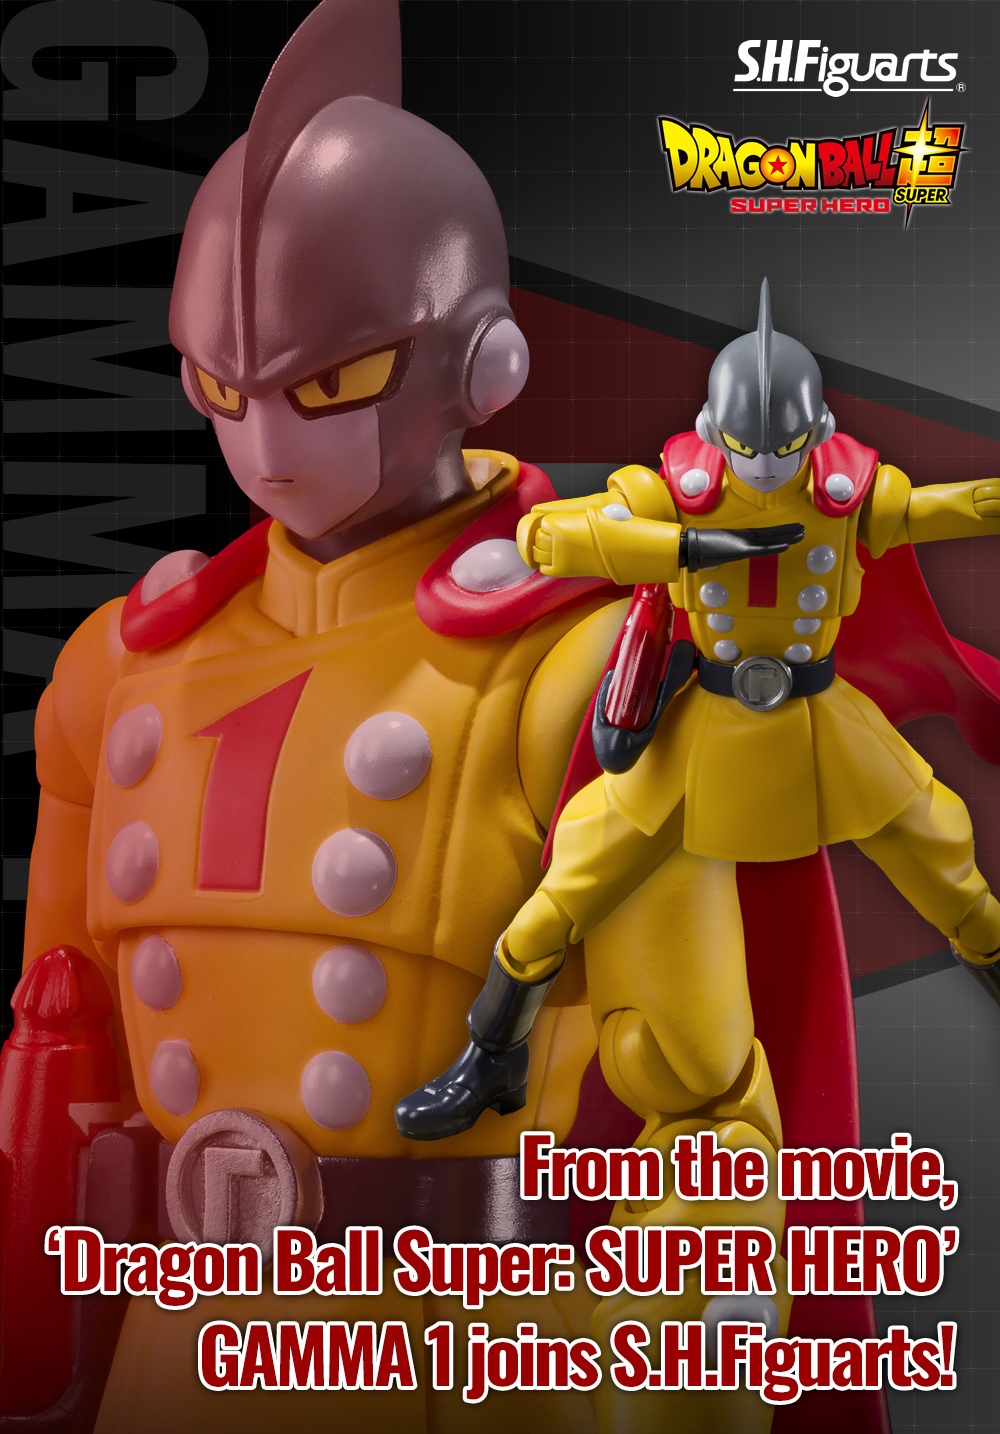 From the movie, ‘Dragon Ball Super: SUPER HERO’ GAMMA 1 joins S.H.Figuarts!